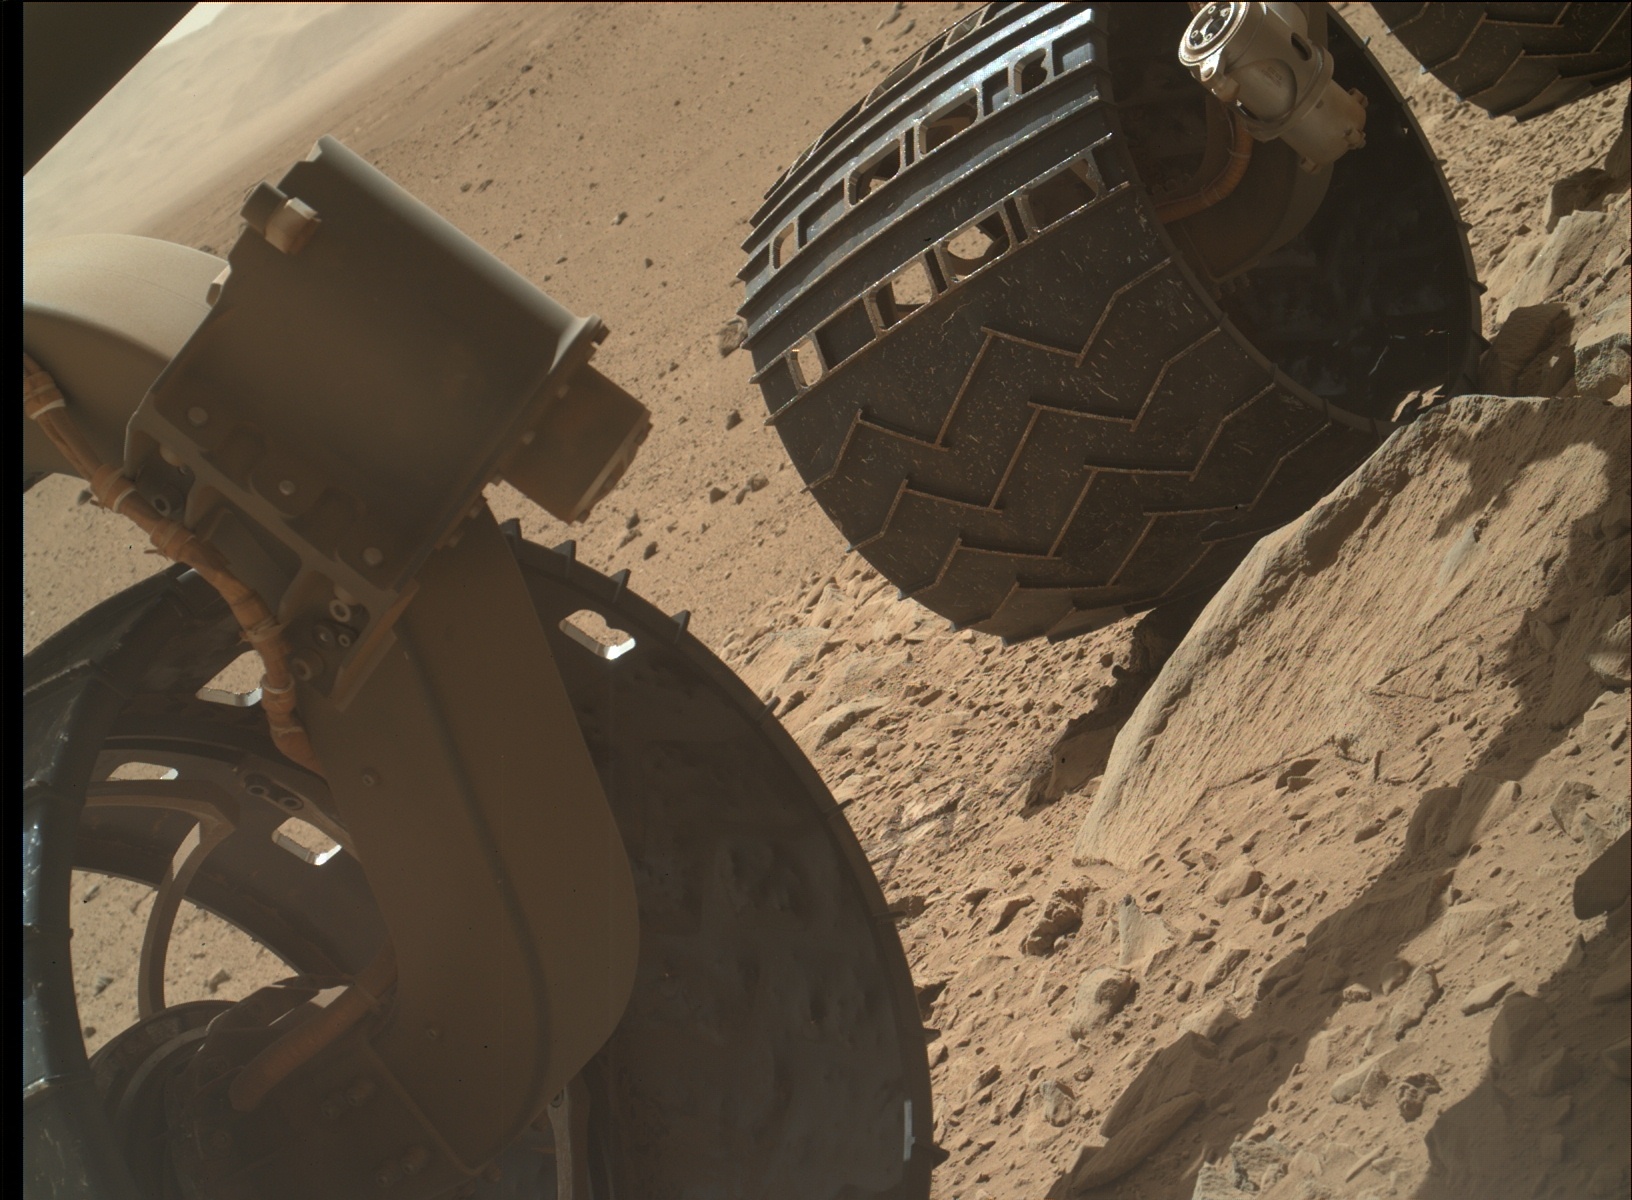 Nasa's Mars rover Curiosity acquired this image using its Mars Hand Lens Imager (MAHLI) on Sol 506